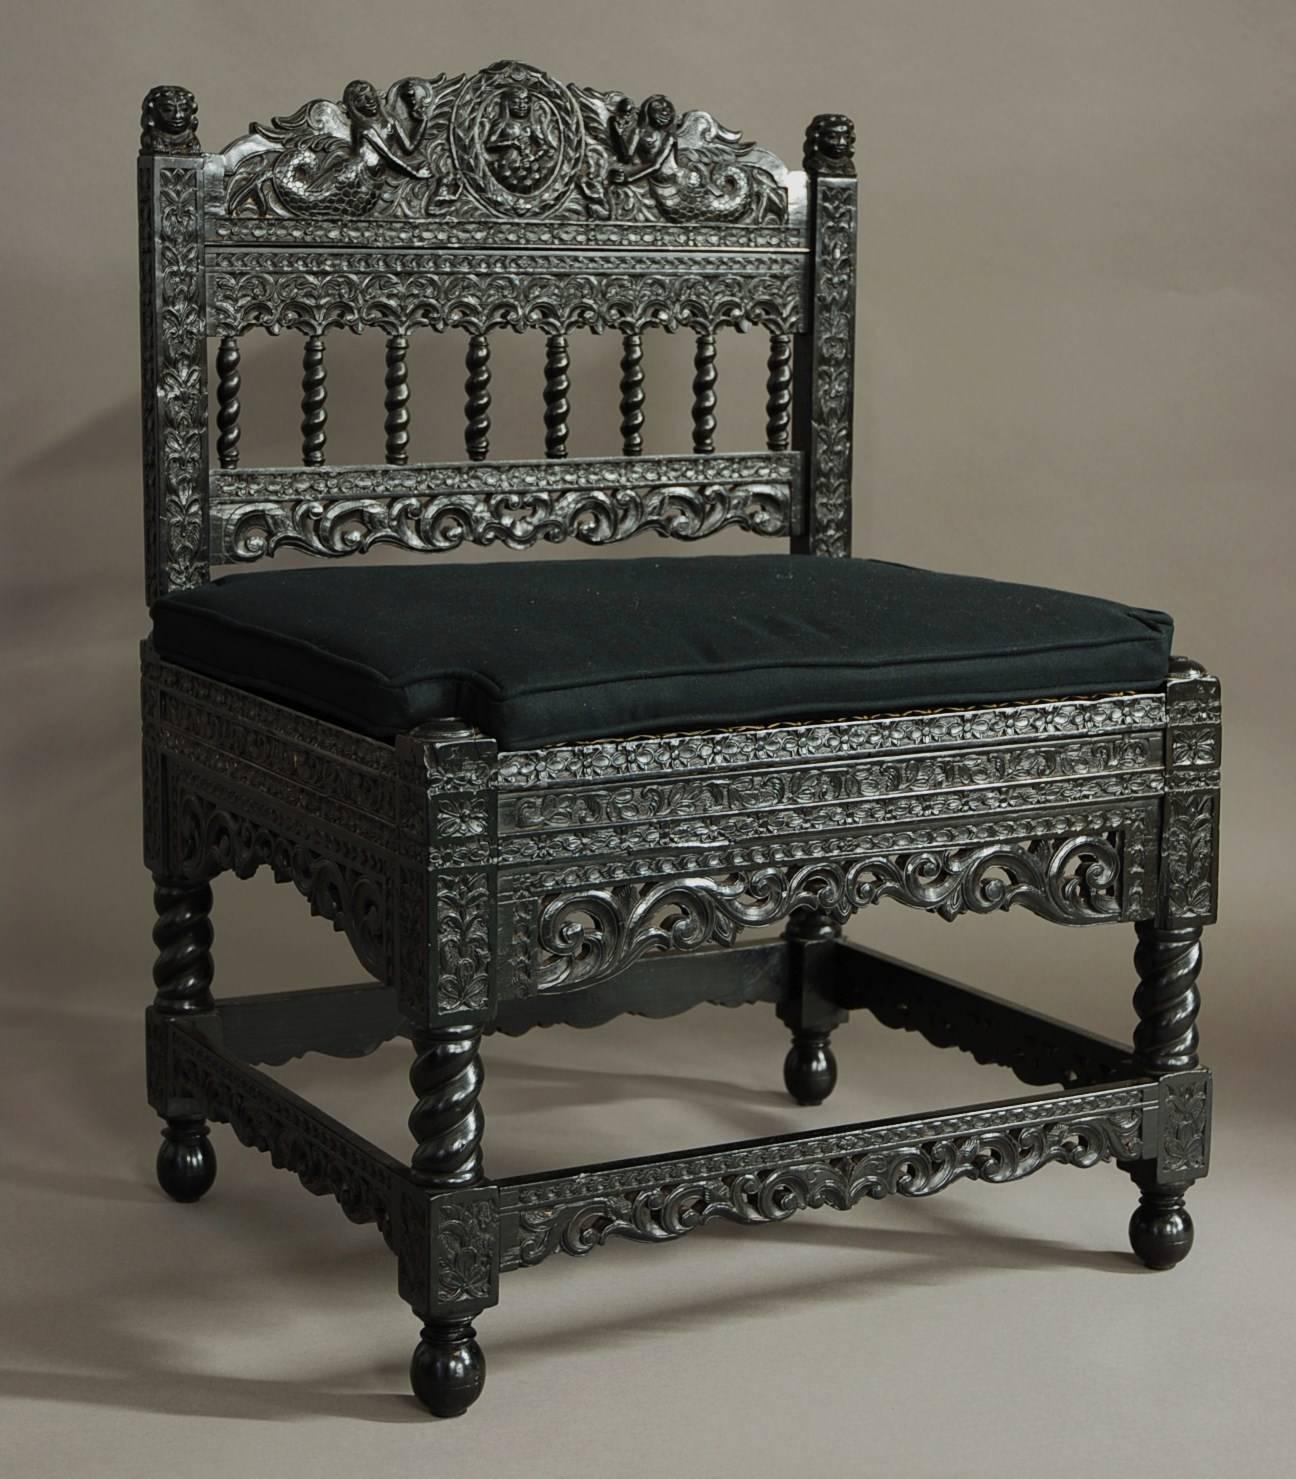 Indian Superb Quality Late 17th Century Solid Ebony Low Chair